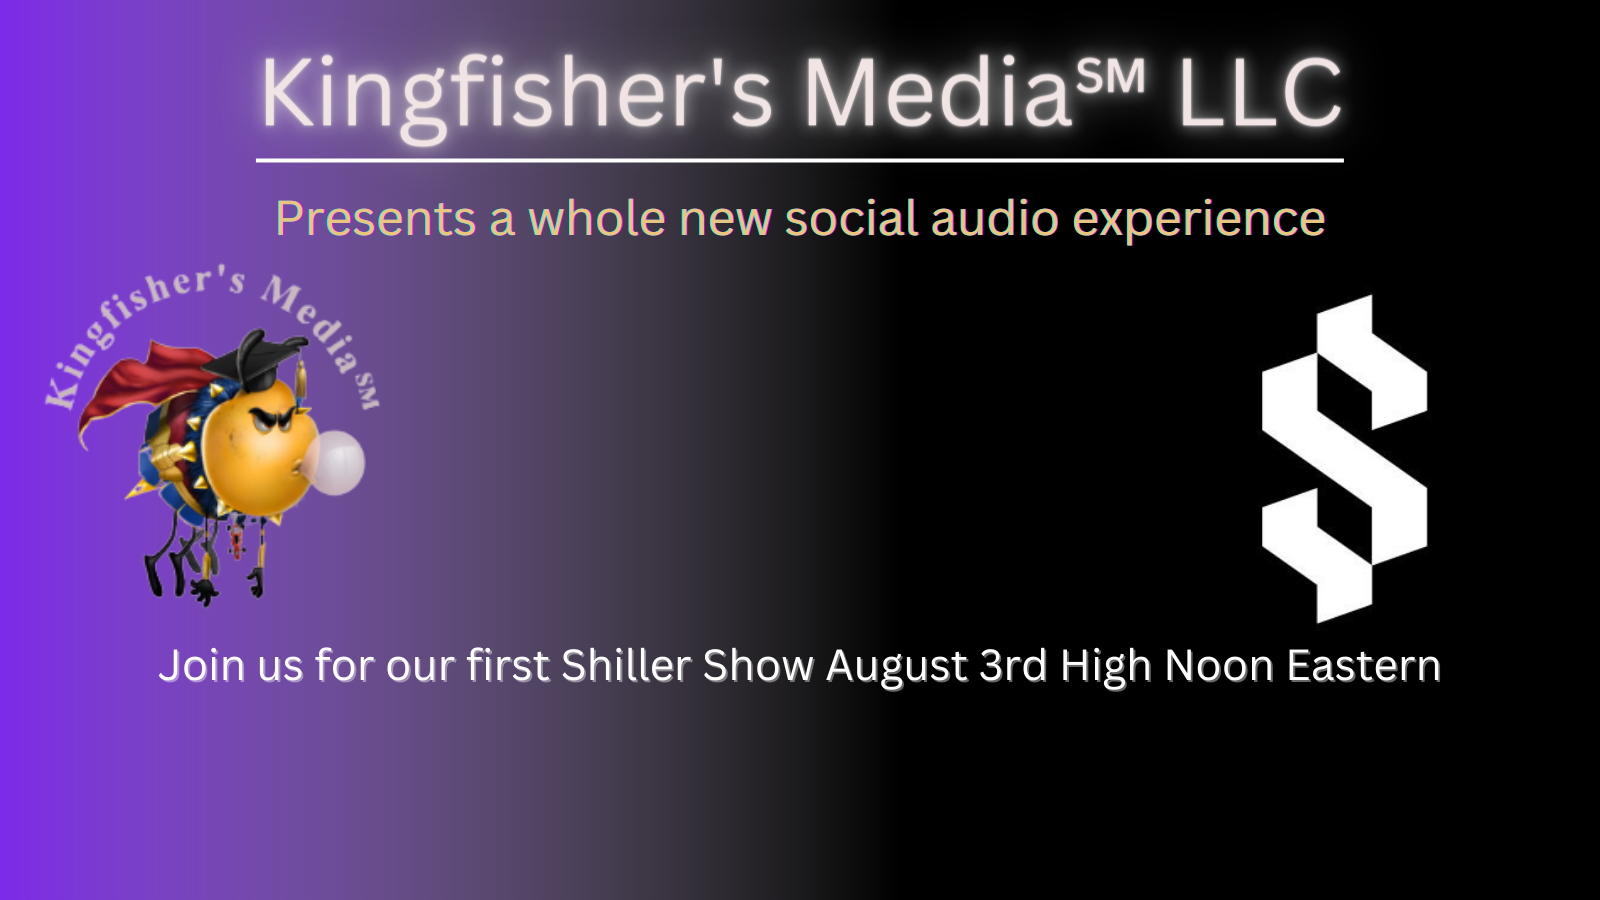 Kingfisher’s Media℠ presents conversations at Kingfisher's Corner™  Featured Image #Web3Event #Web3Community